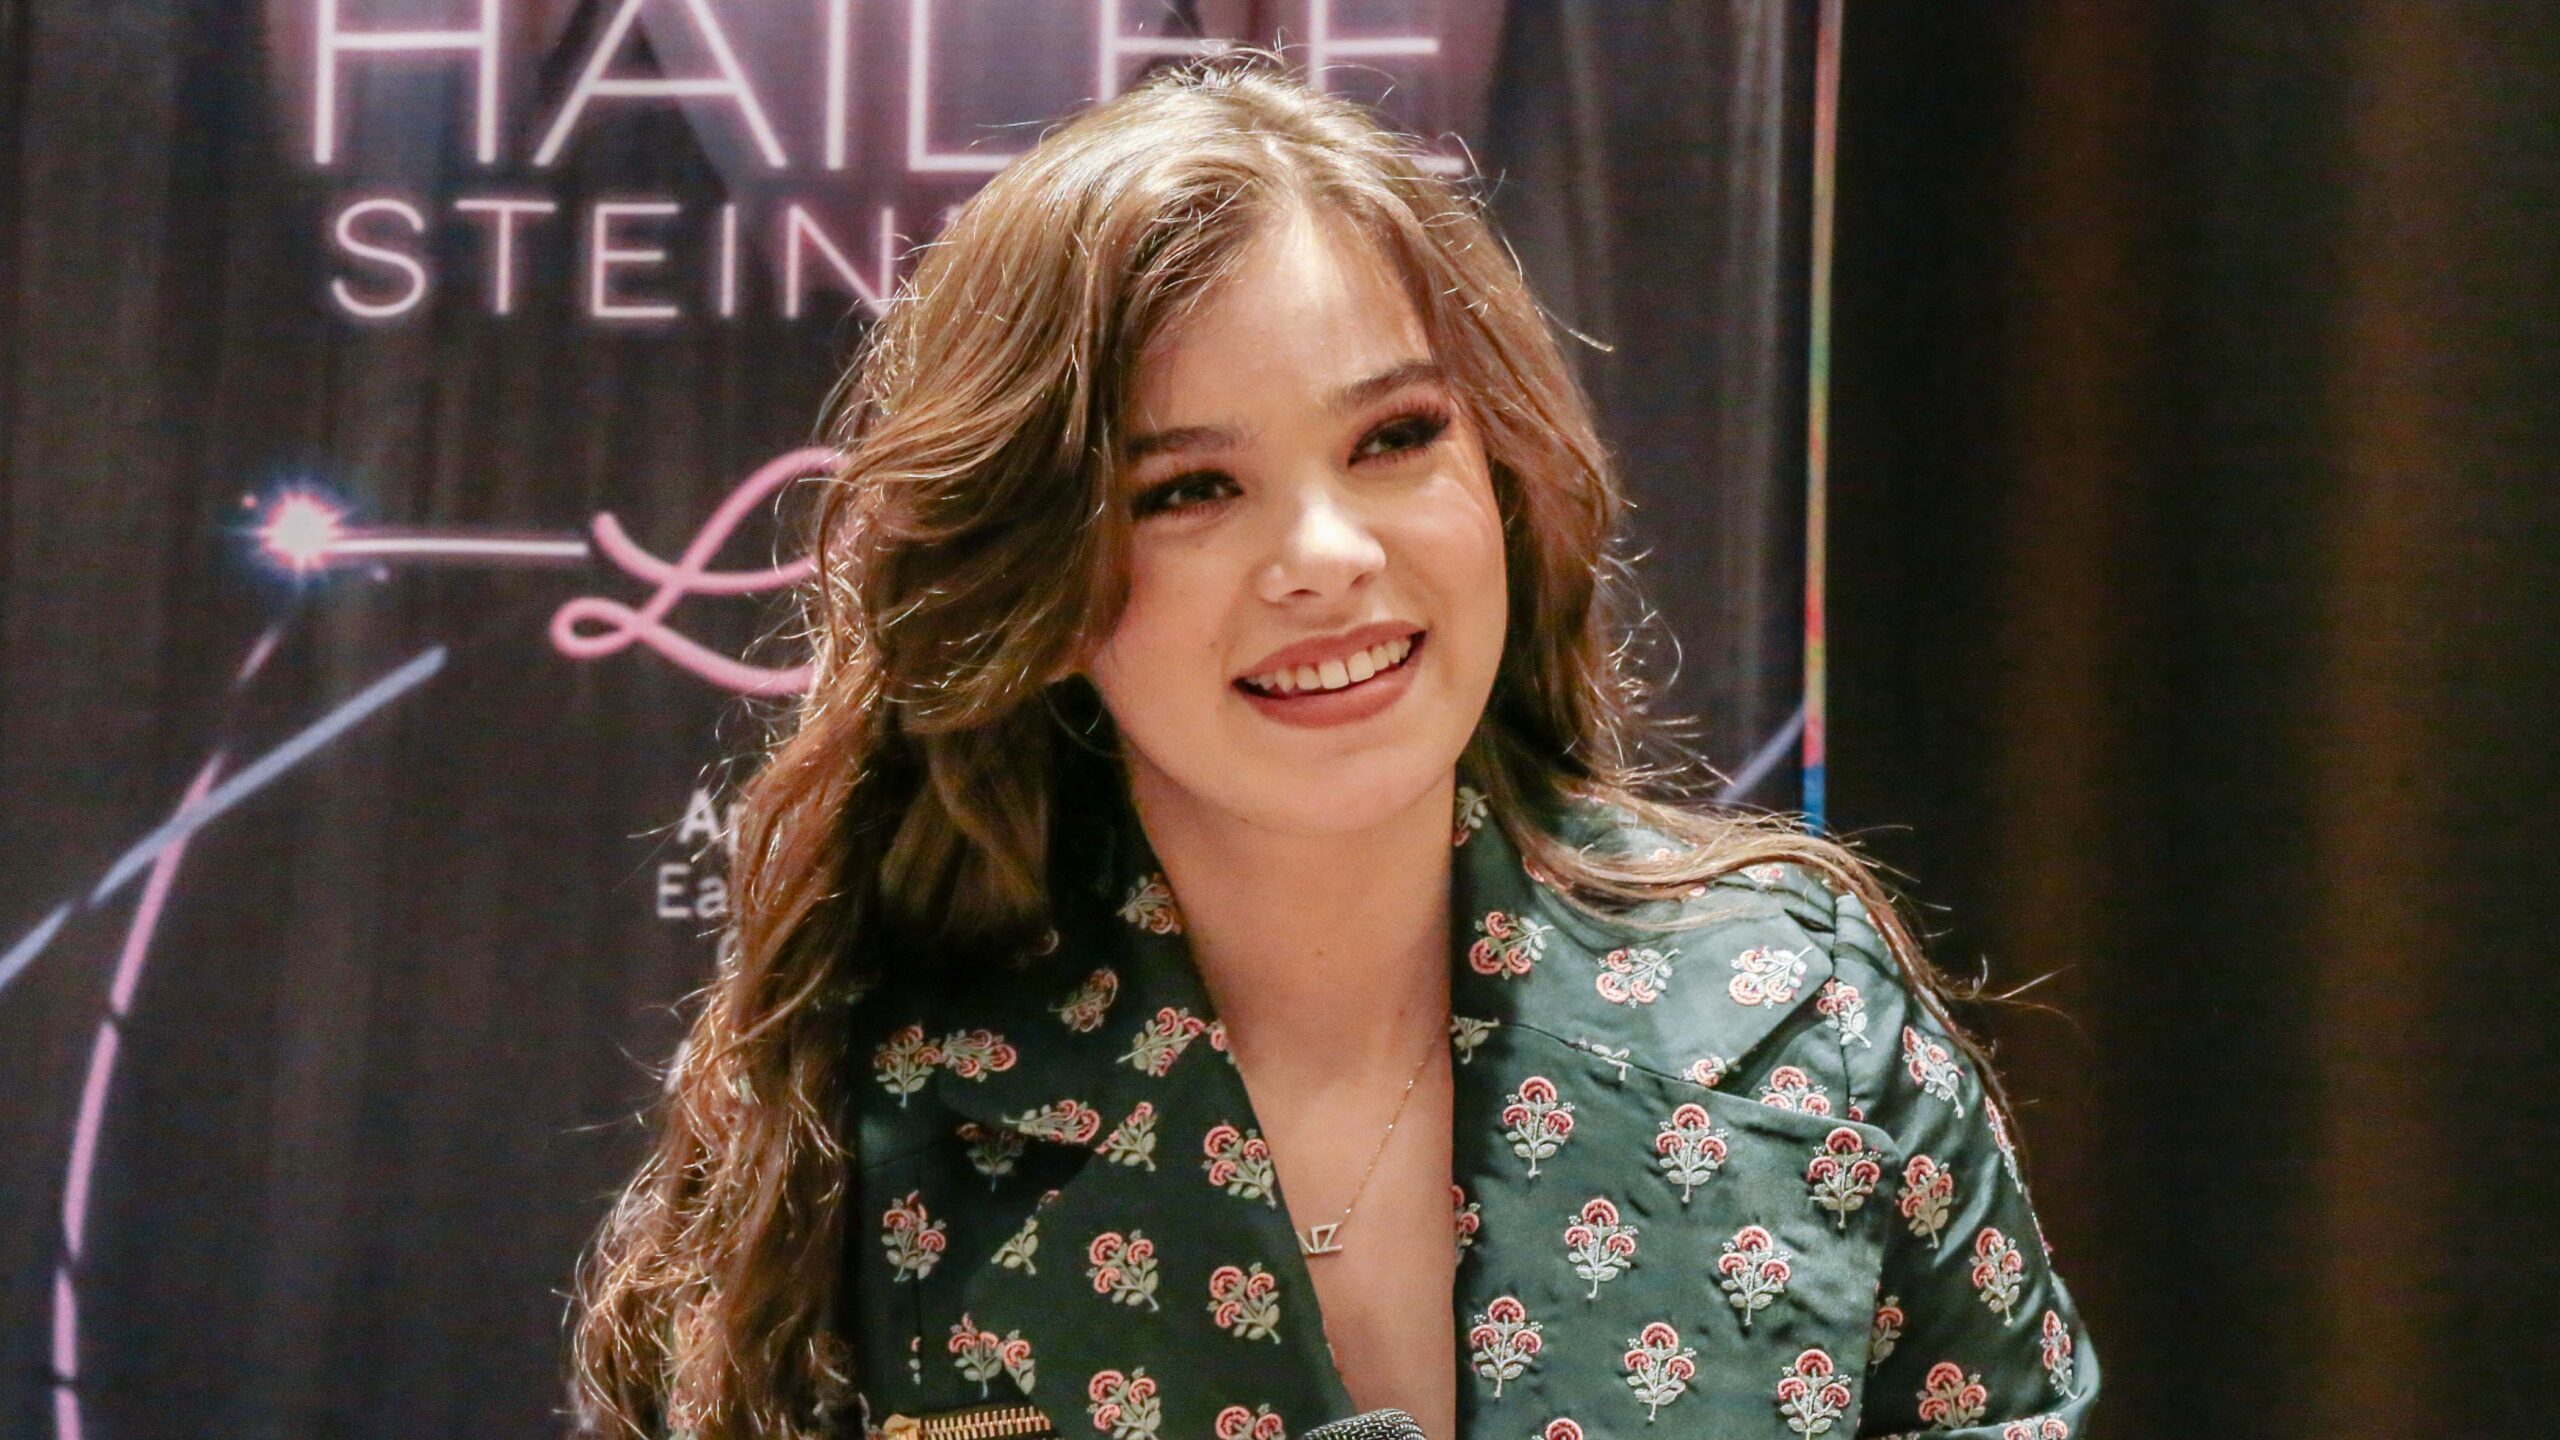 WATCH: Hailee Steinfeld on connecting with her Filipino roots